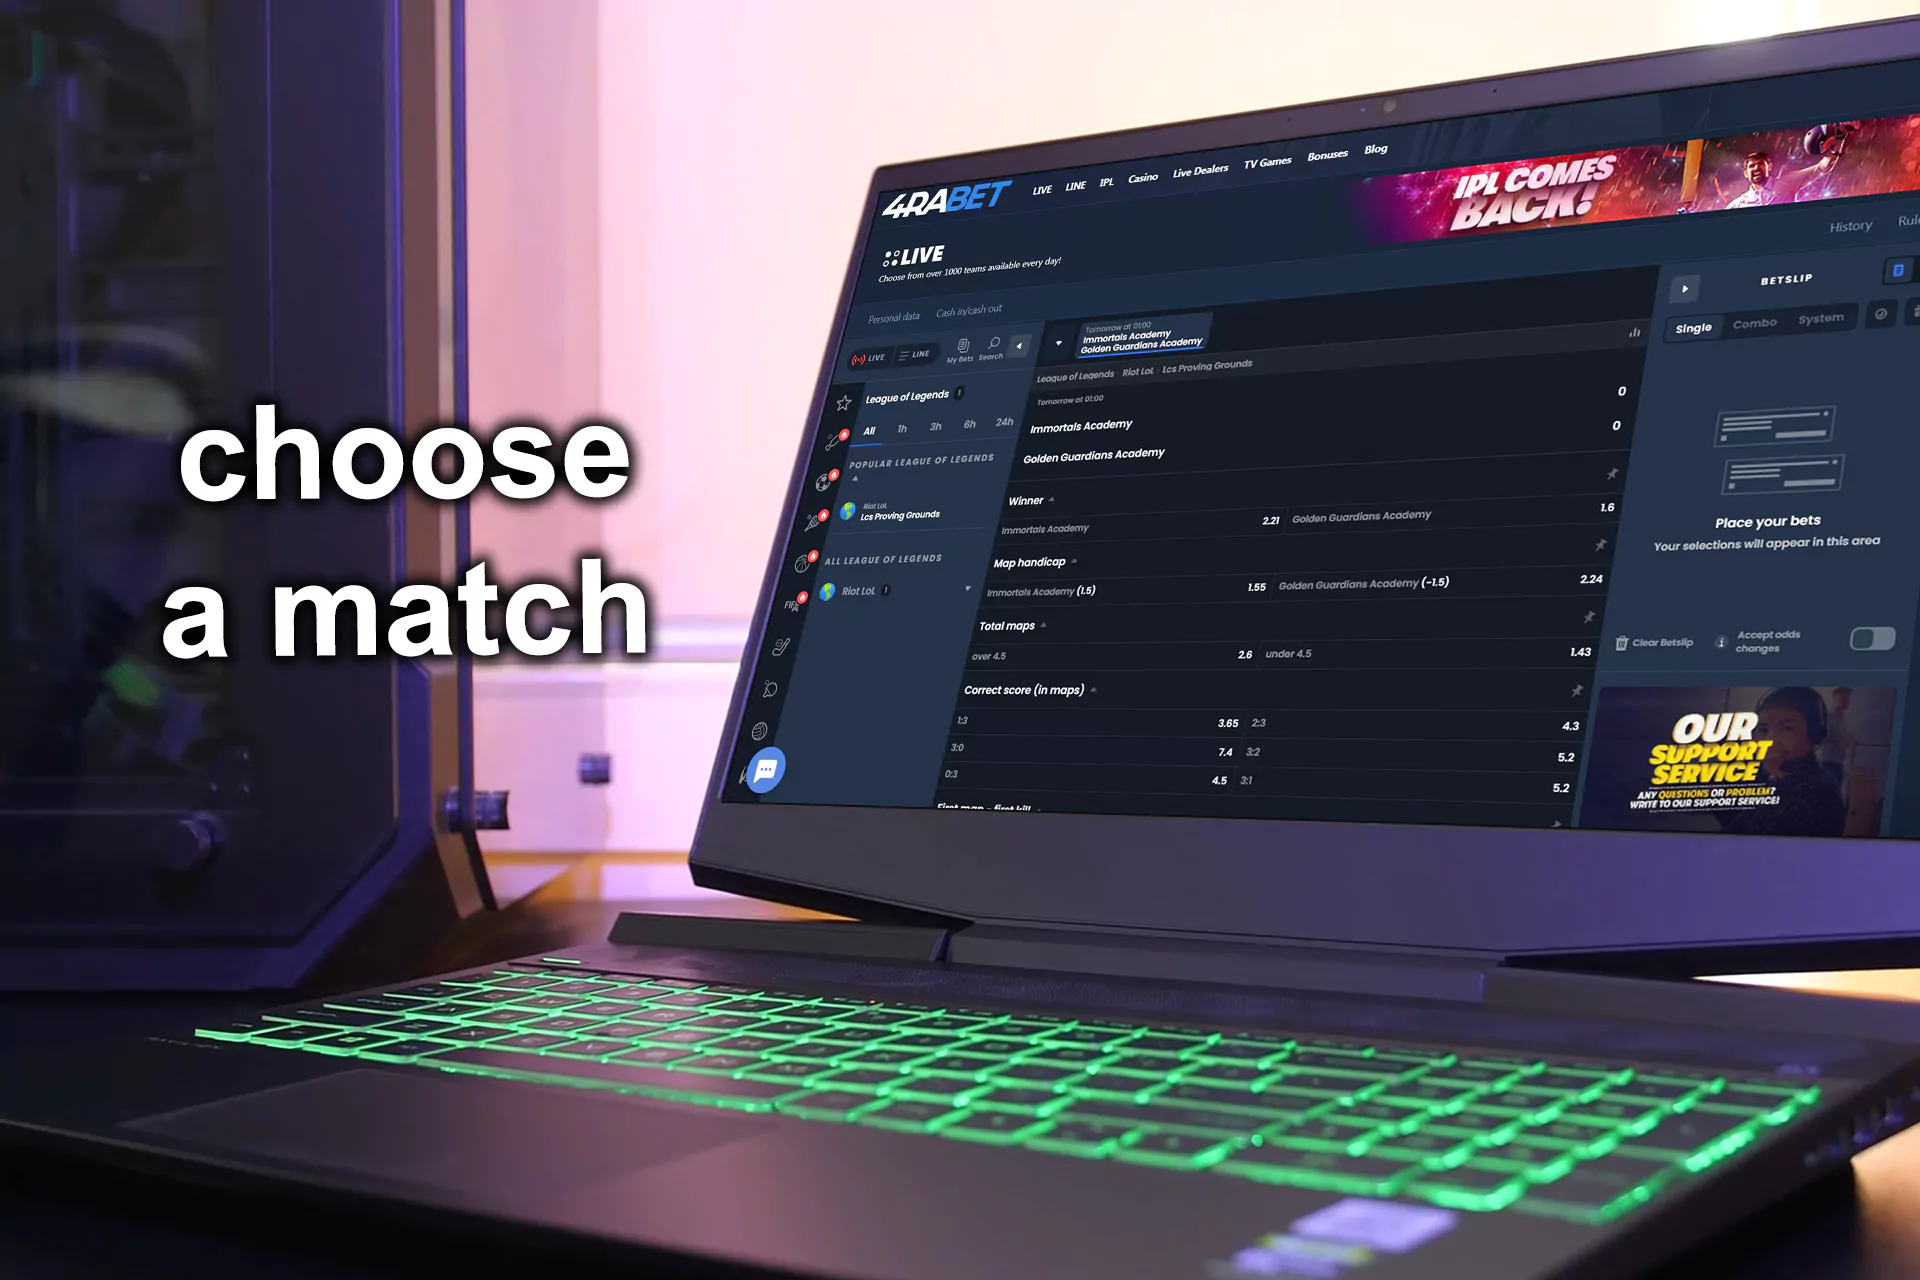 Look through the events and select a match you want to place a bet on.